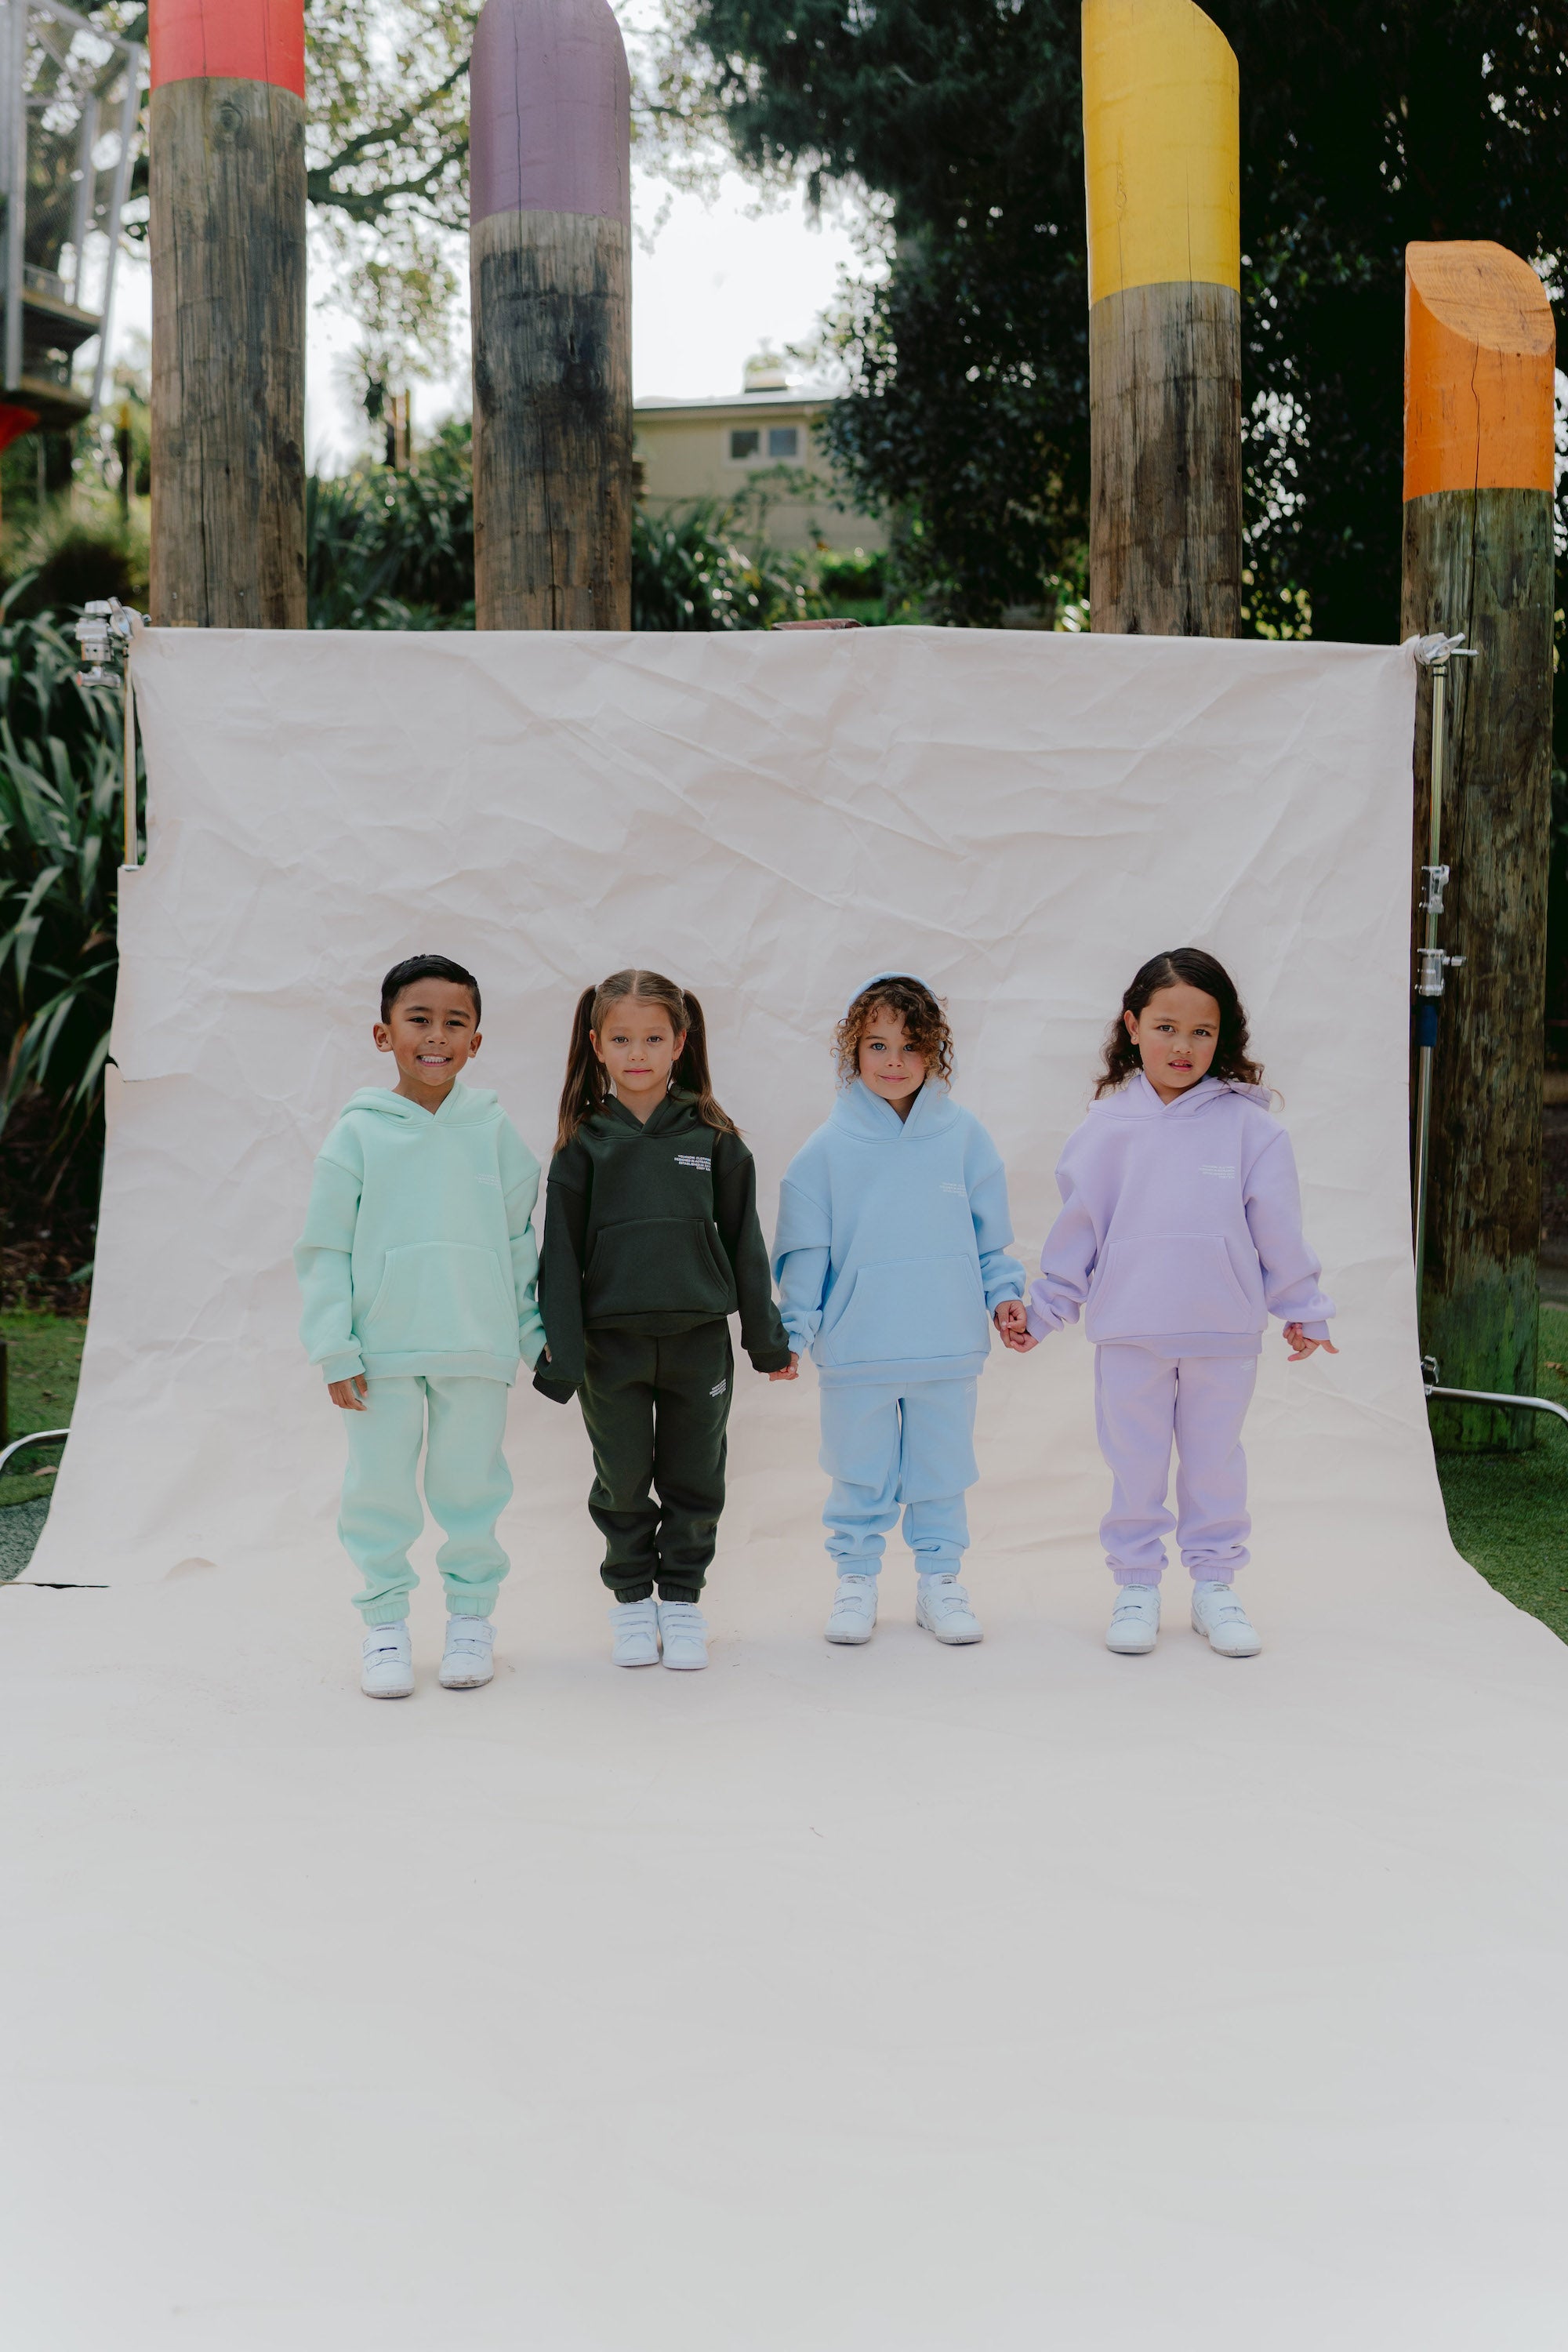 product image  KIDS COSYSZN PANTS | BABY BLUE